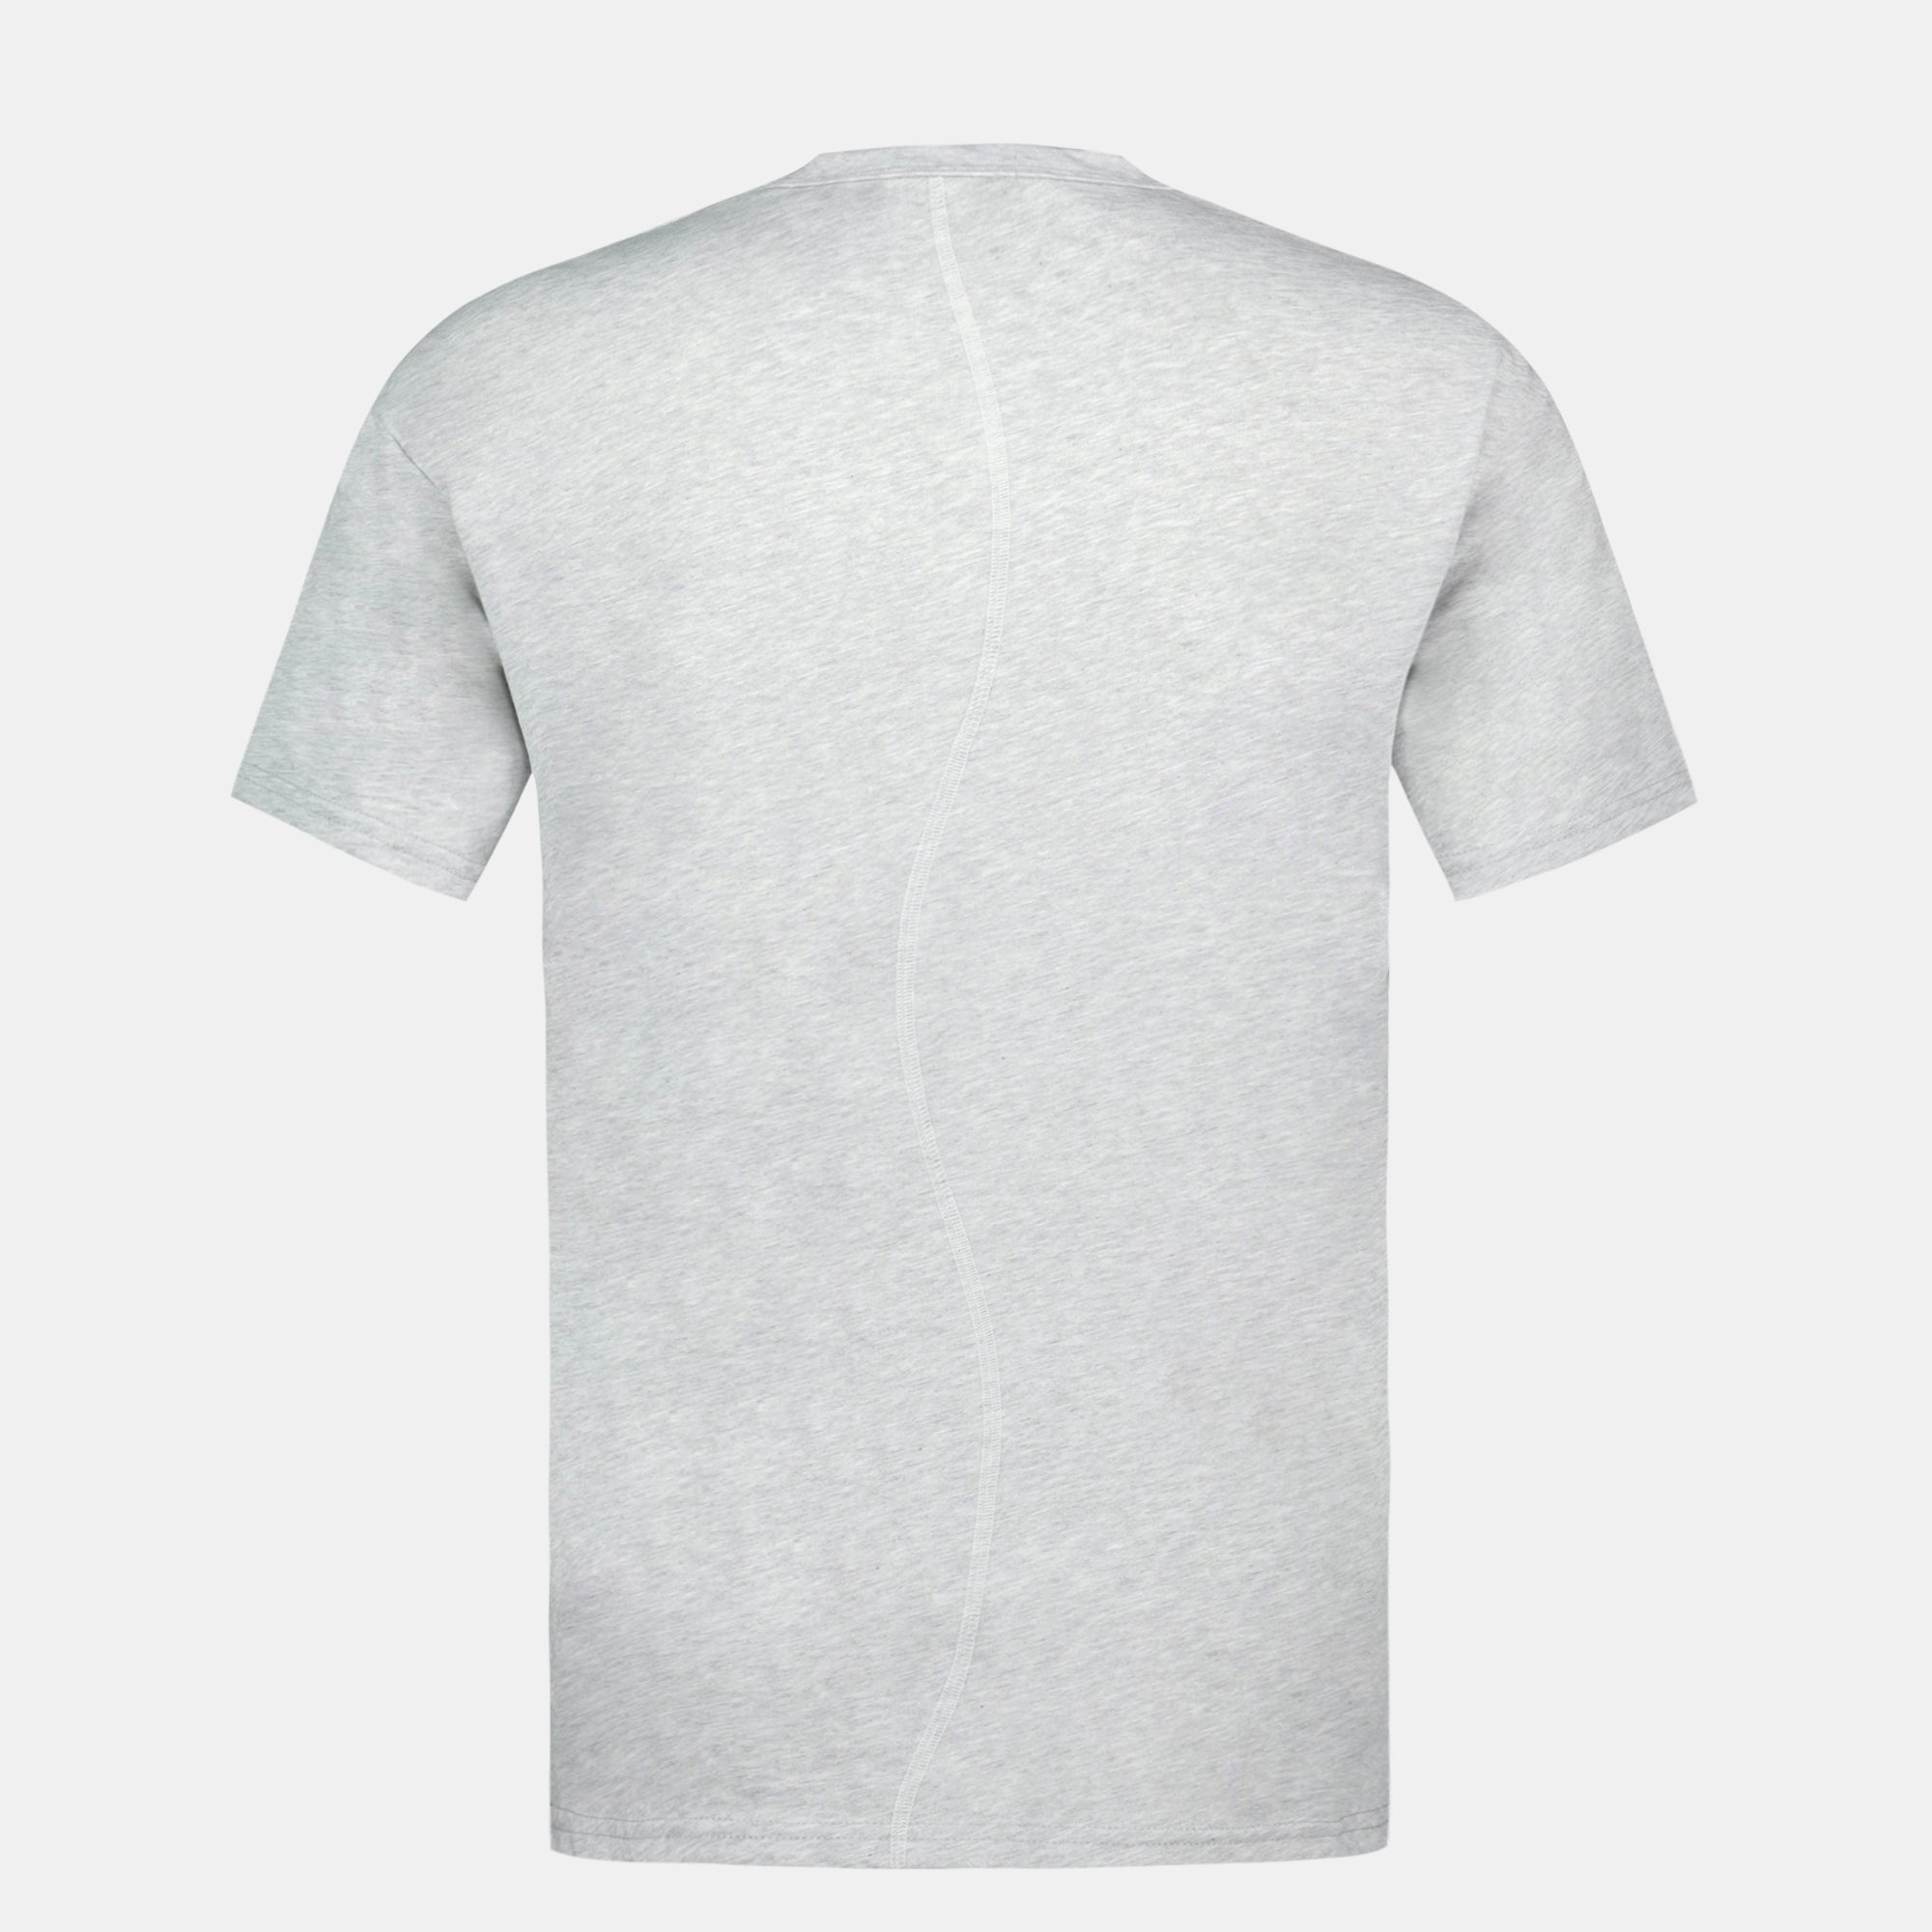 2410385-EFRO 24 Tee SS N°3 M gris chiné clair  | Camiseta Hombre